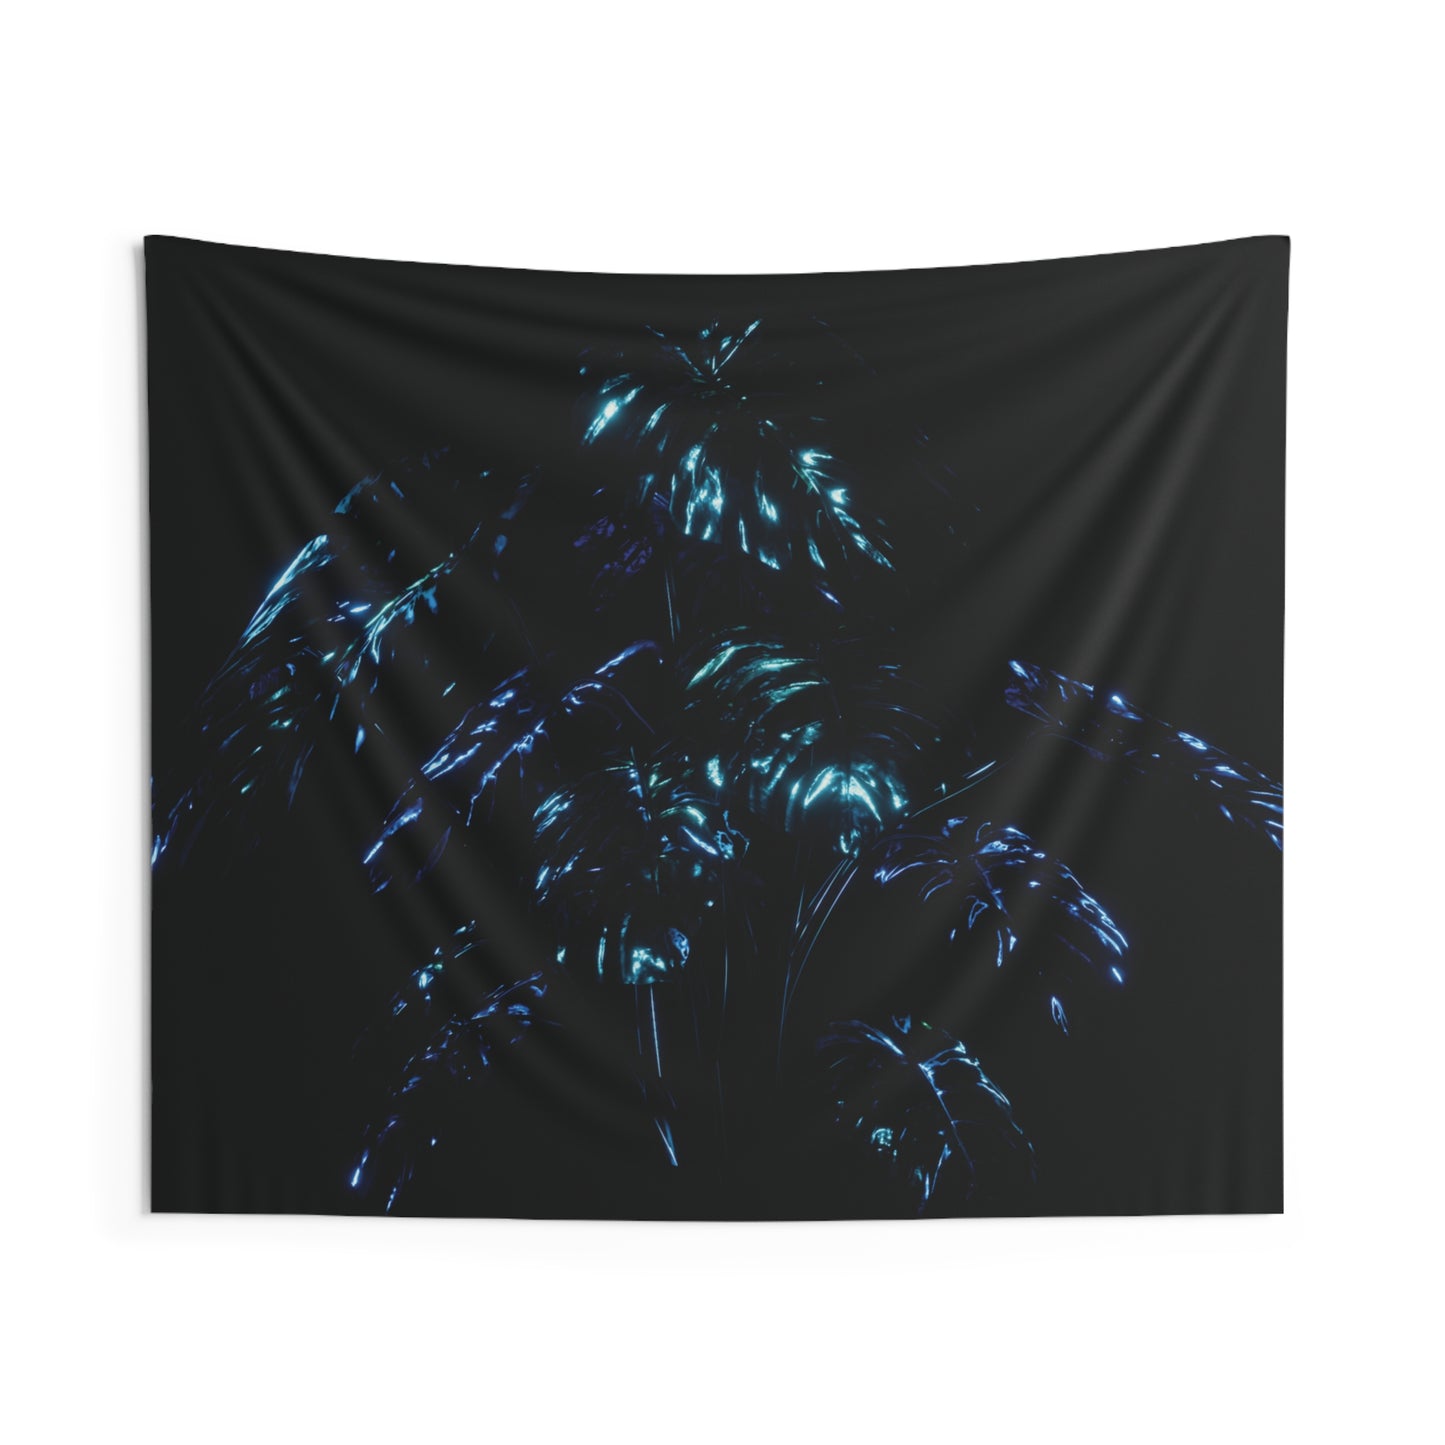 omega flora ii: peace and shadow [vivid nocturn] art tapestry